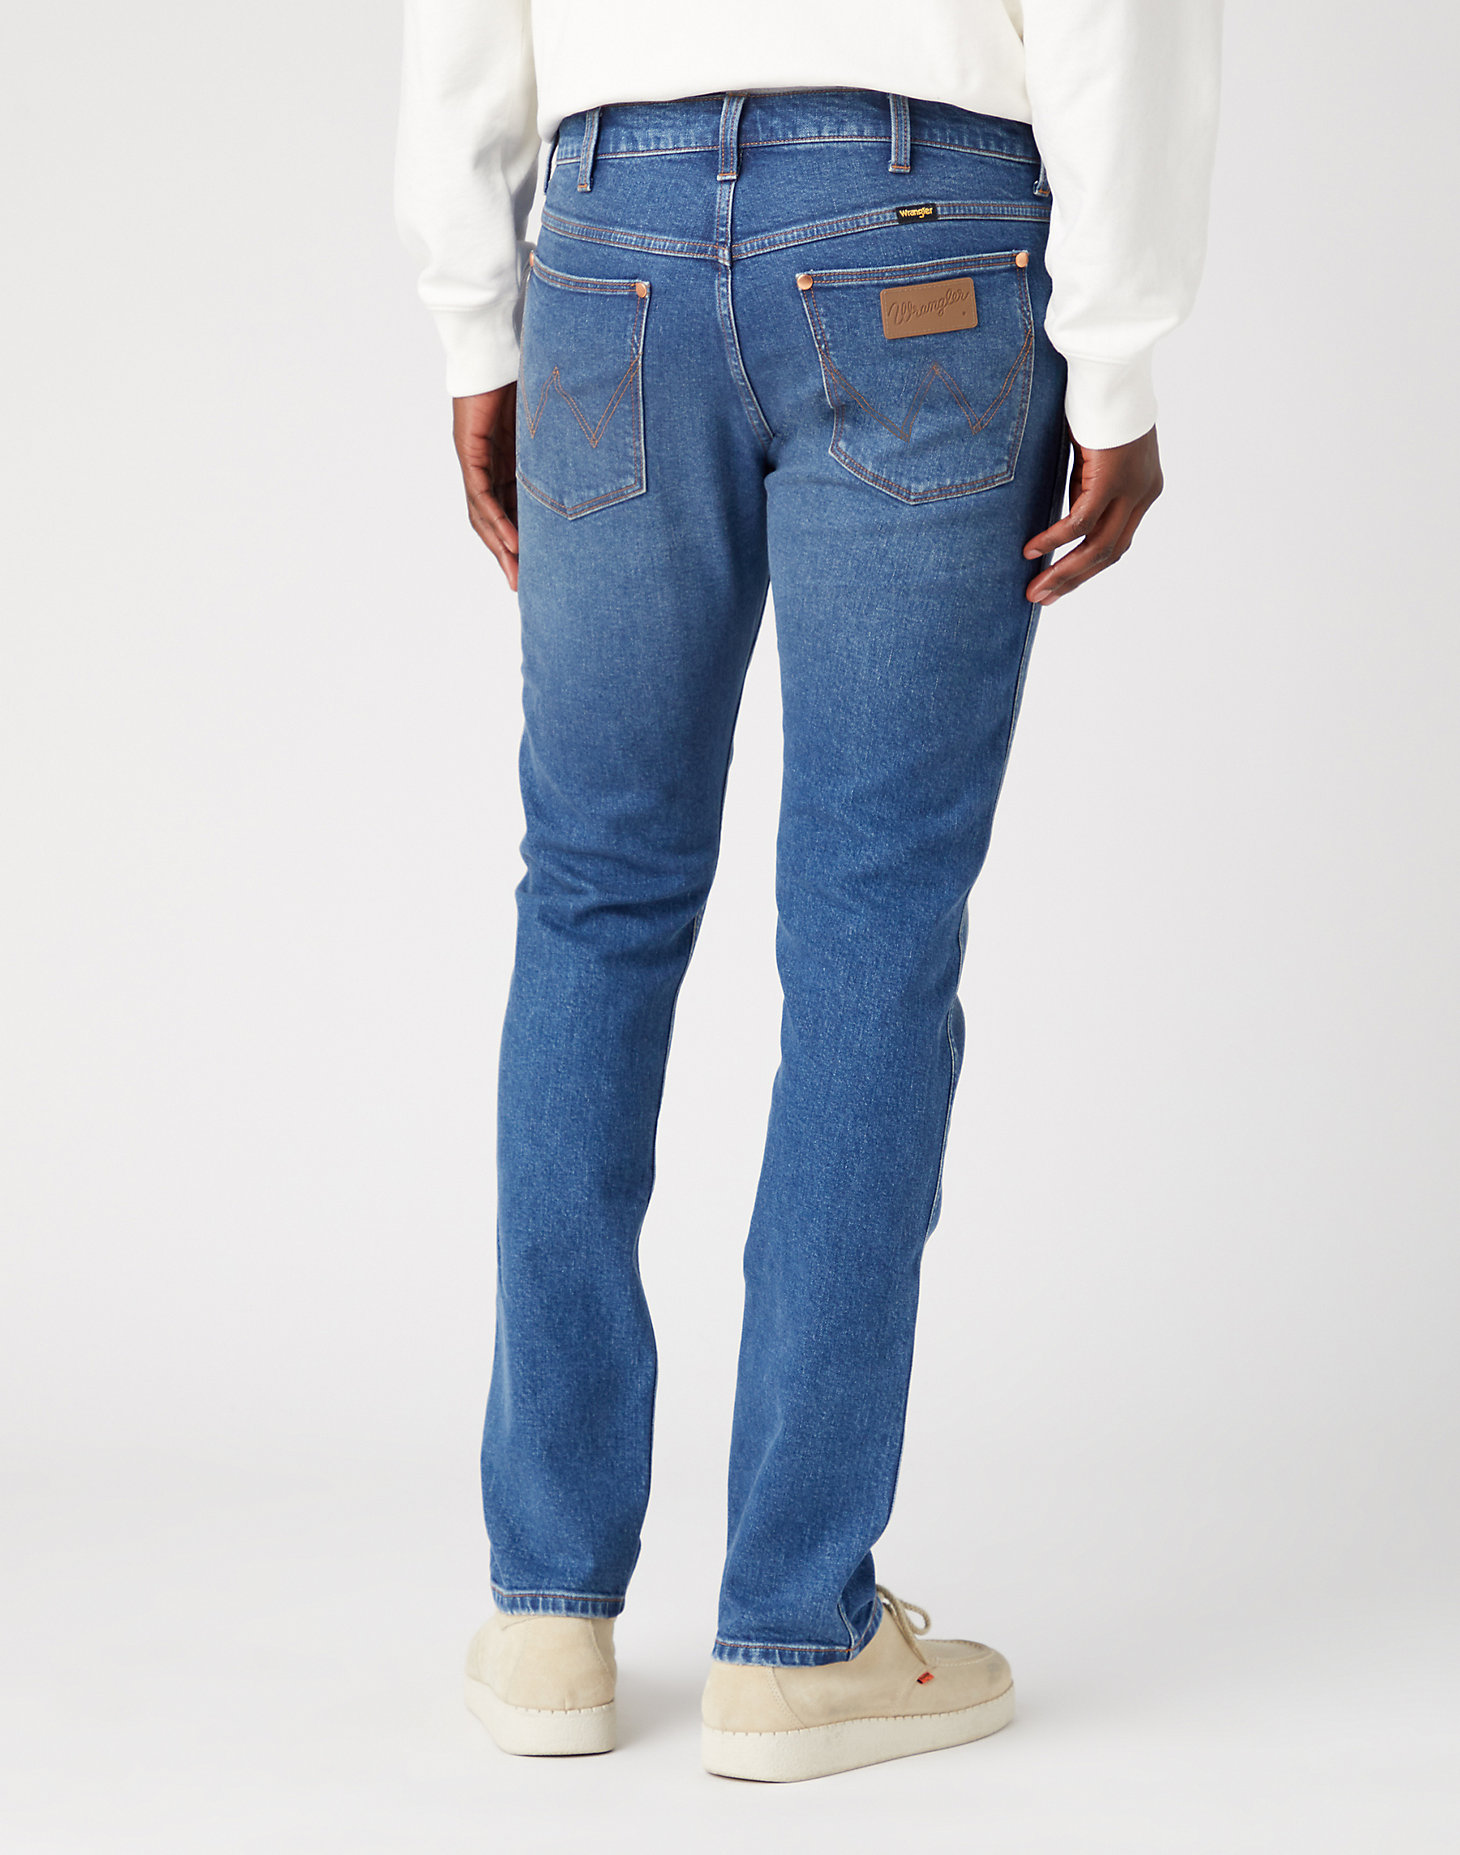 Indigood Icons 11MWZ Western Slim Jeans in Wranch alternative view 2